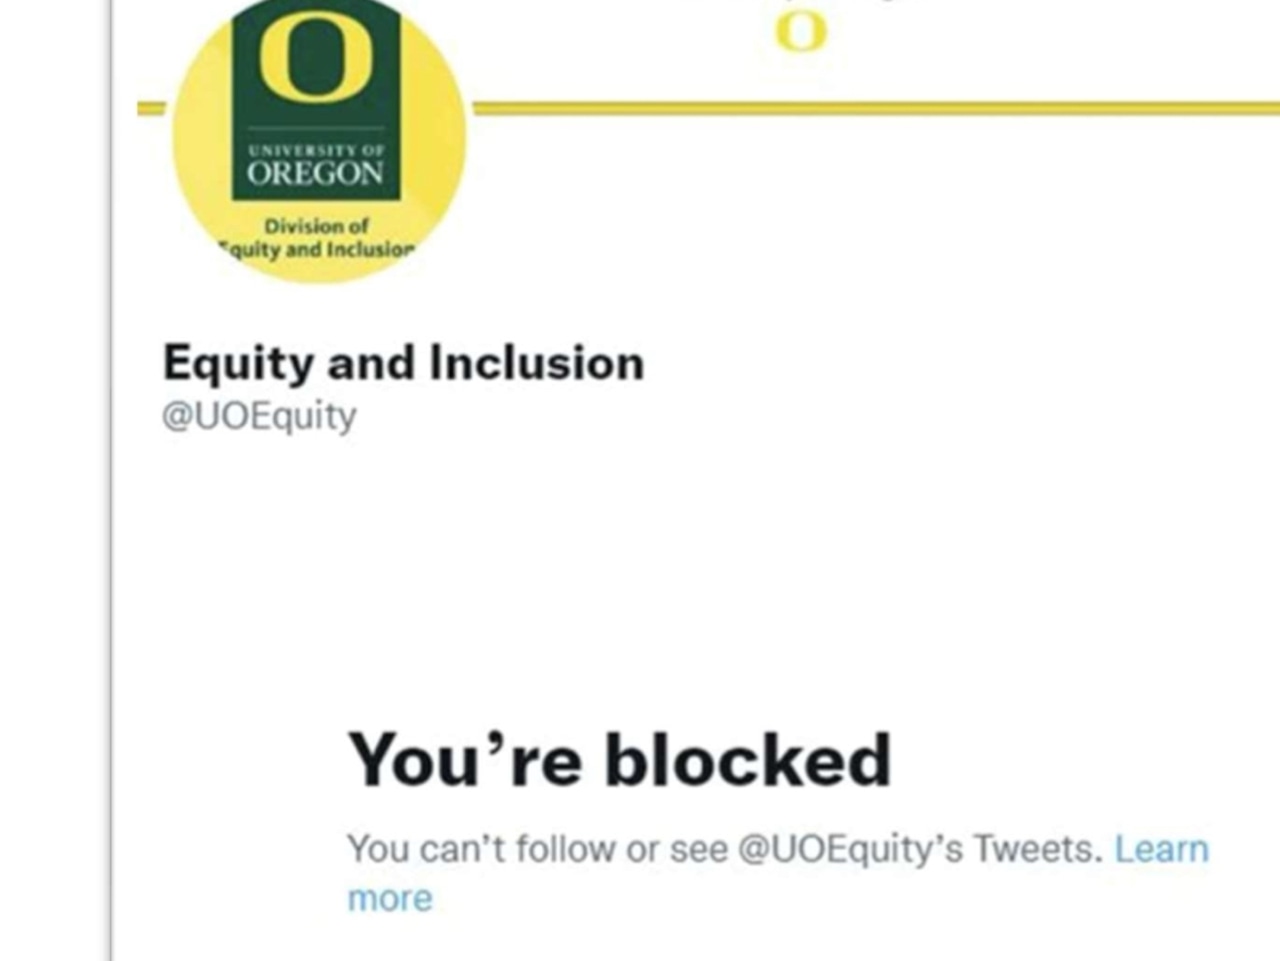 Judge orders University of Oregon not to delete profs social media posts even if theyre offensive [Video]